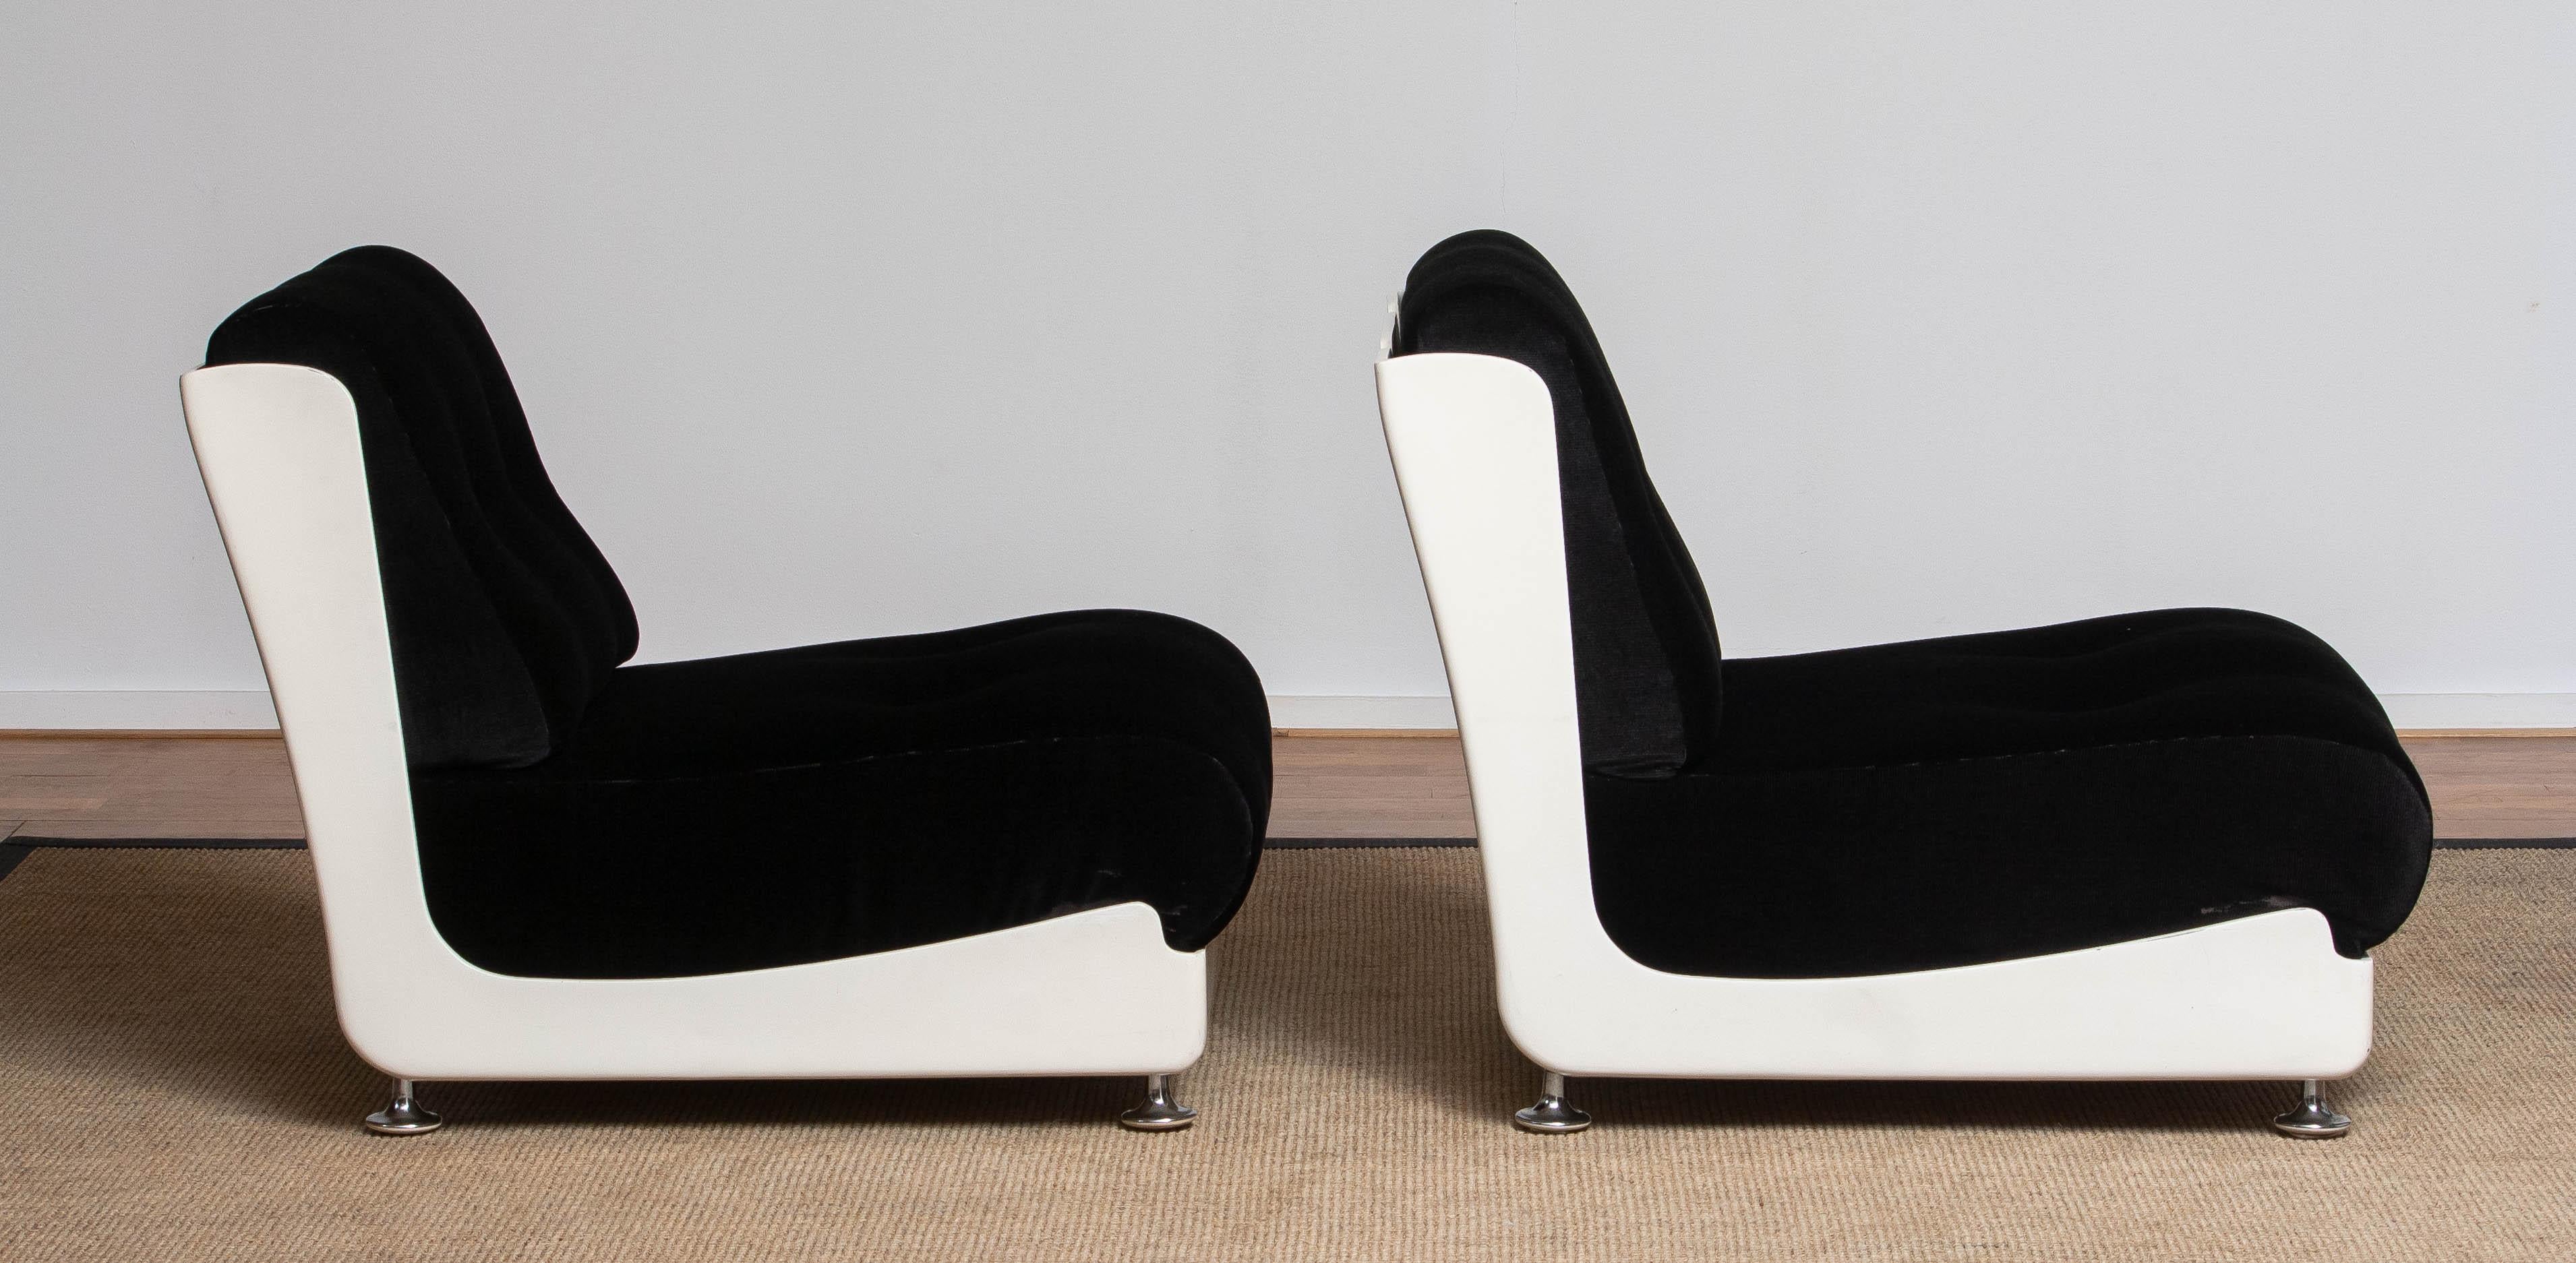 1970's Italian Pair Roche Bobois Lounge Easy Chairs Designed by Mario Bellini In Good Condition In Silvolde, Gelderland